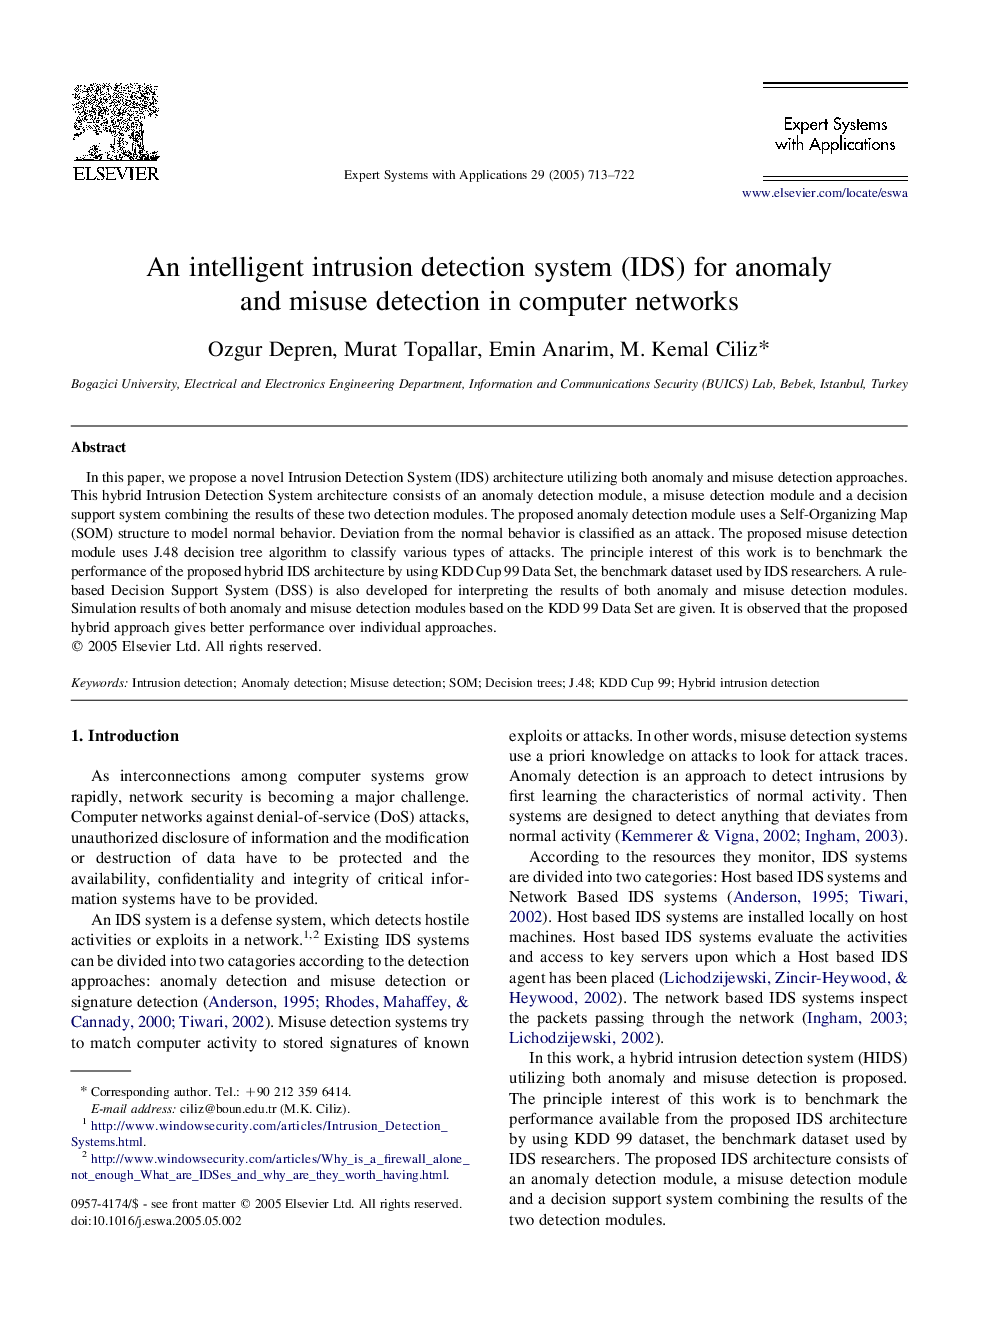 An intelligent intrusion detection system (IDS) for anomaly and misuse detection in computer networks